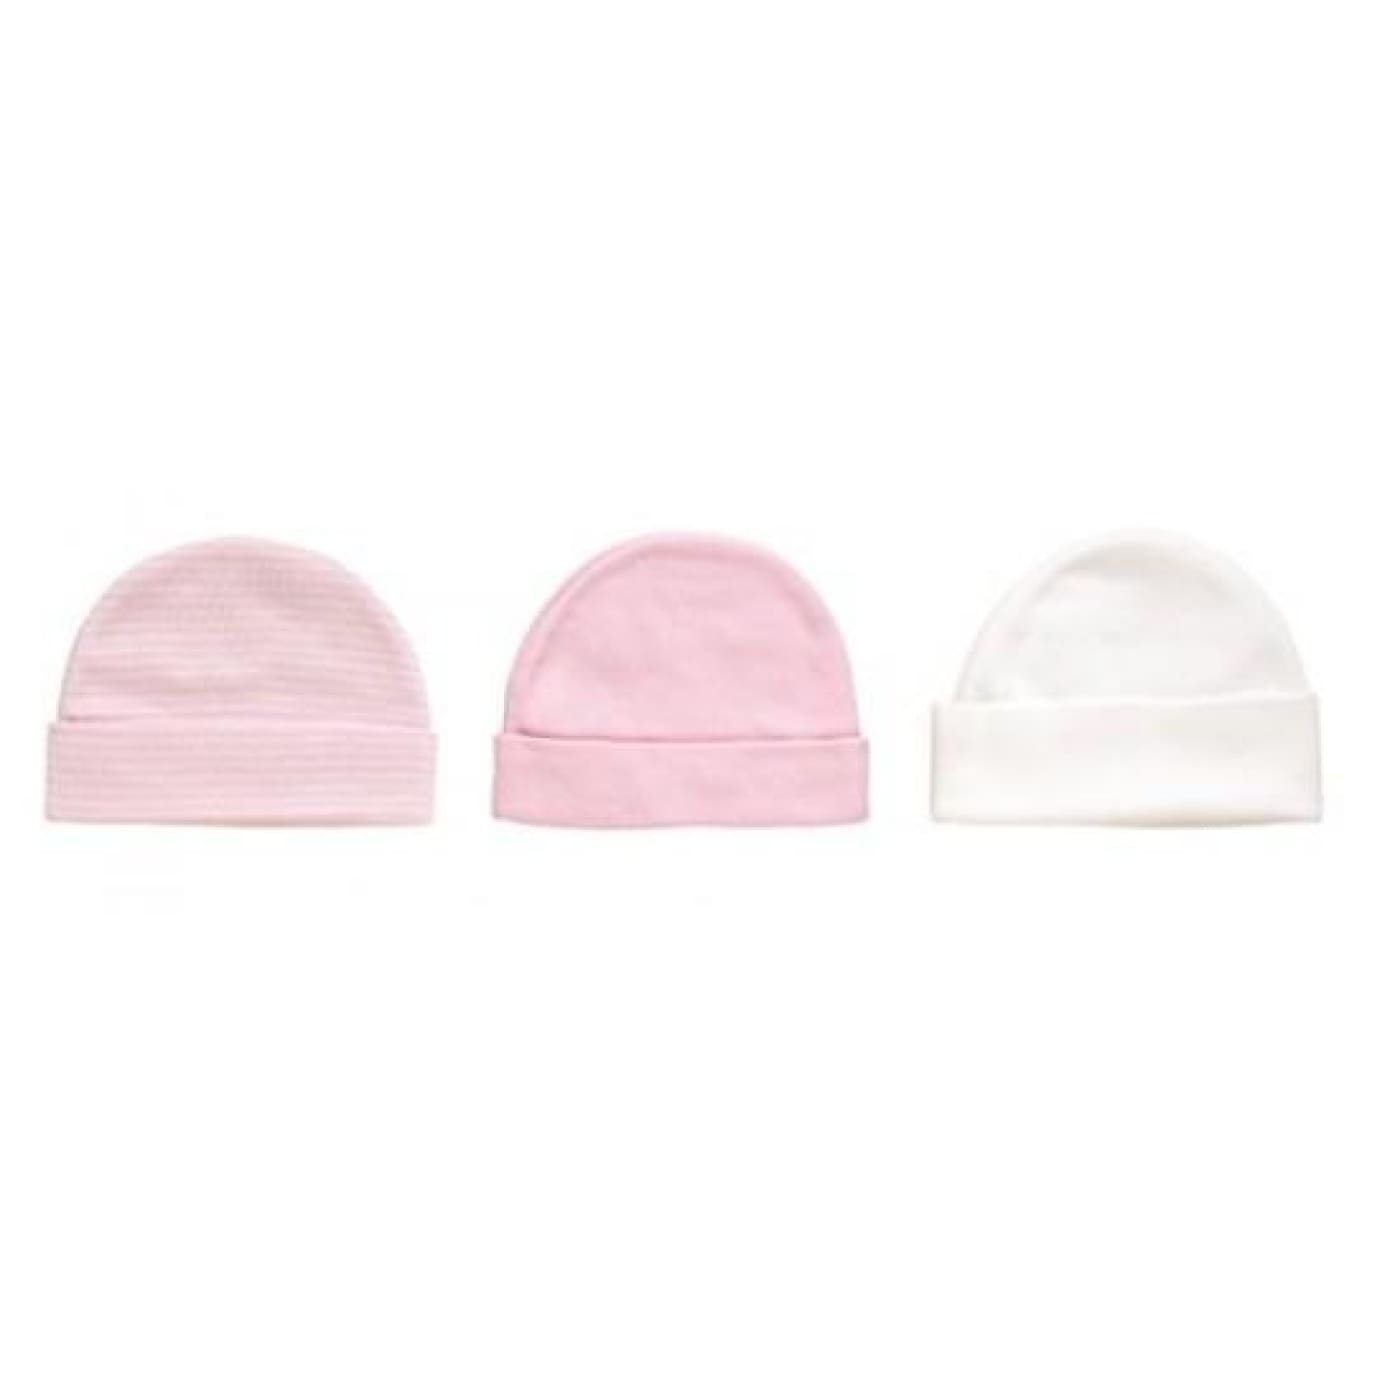 Playette Preemie Caps - Pink/White 3PK - Prem / Pink/White - BABY & TODDLER CLOTHING - BEANIES/HATS